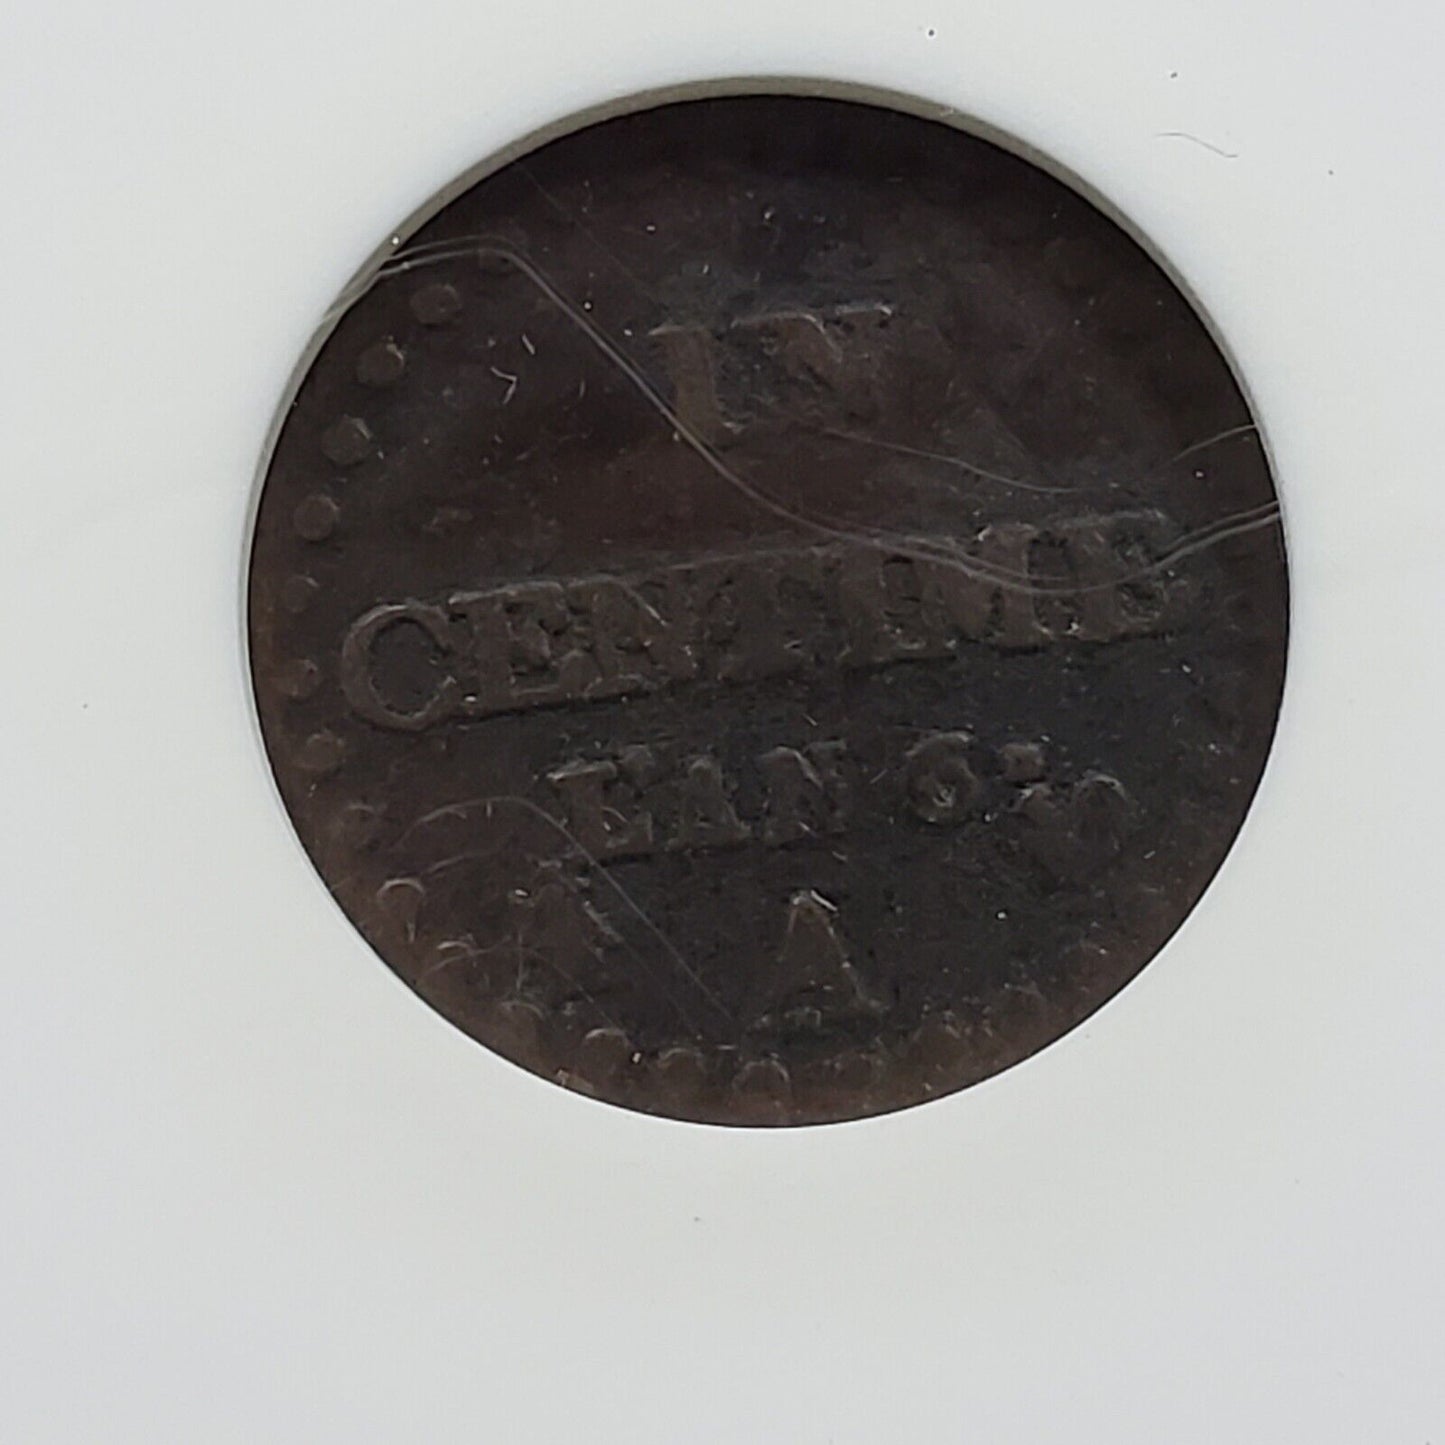 France LAN 6 A (1797-1798) 1 One Centime - Nice Copper Coin